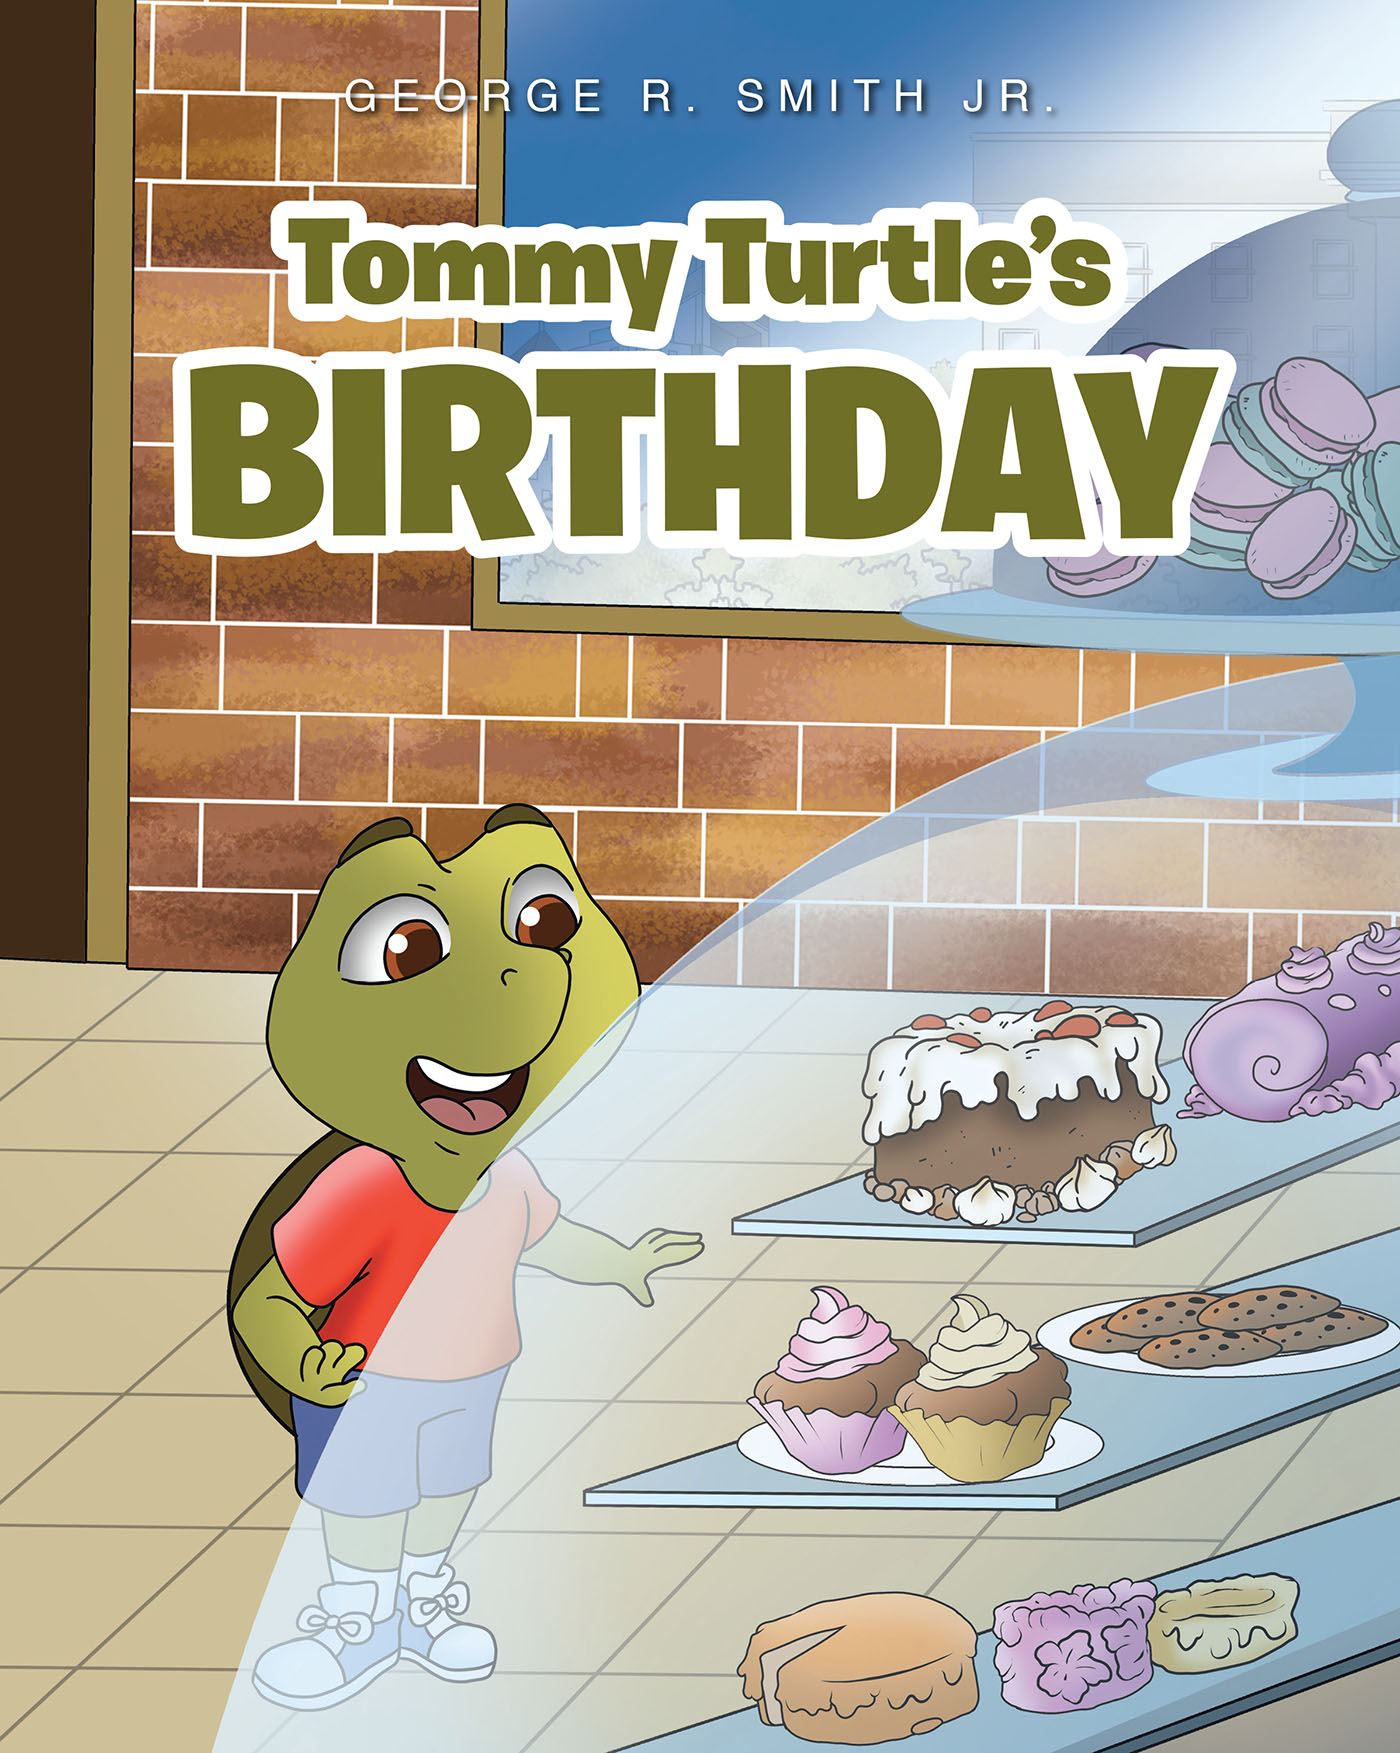 George R. Smith Jr.’s Newly Released "Tommy Turtle’s Birthday" is a Lighthearted Tale of Love and Family Connection During a Celebration